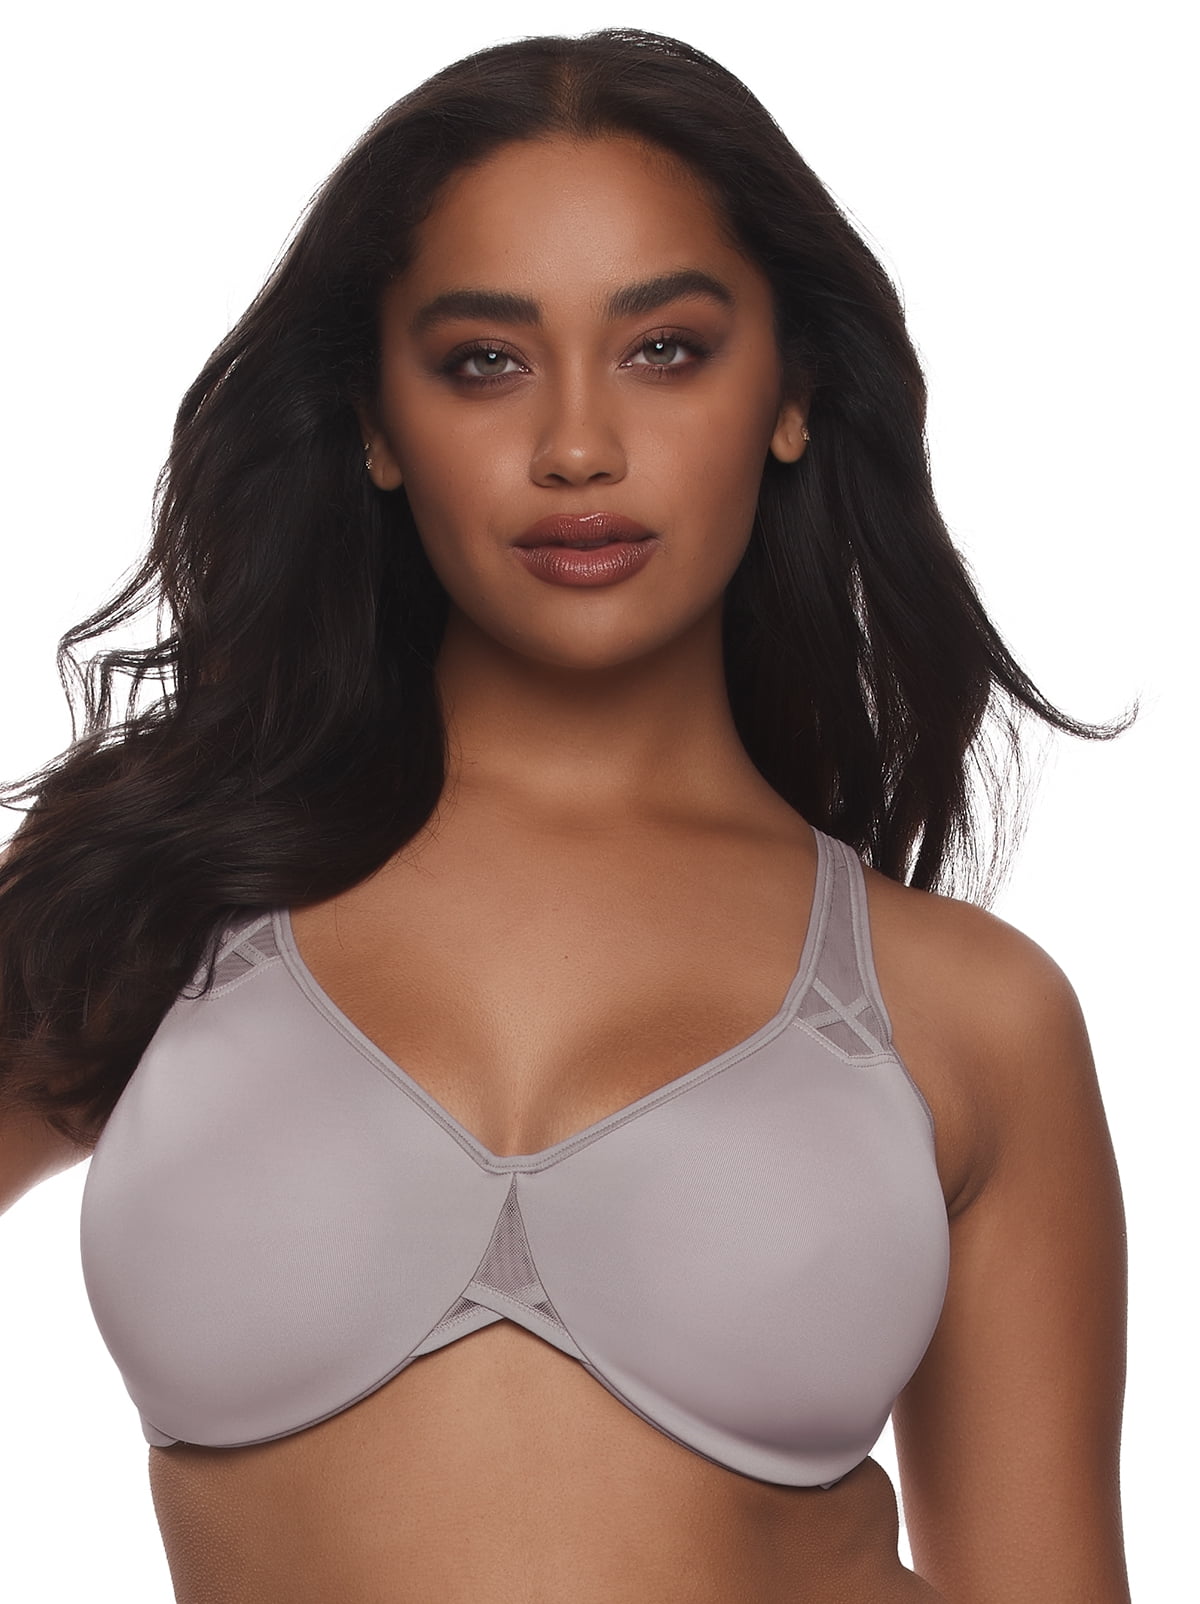 deray owens recommends What Does A 32ddd Look Like